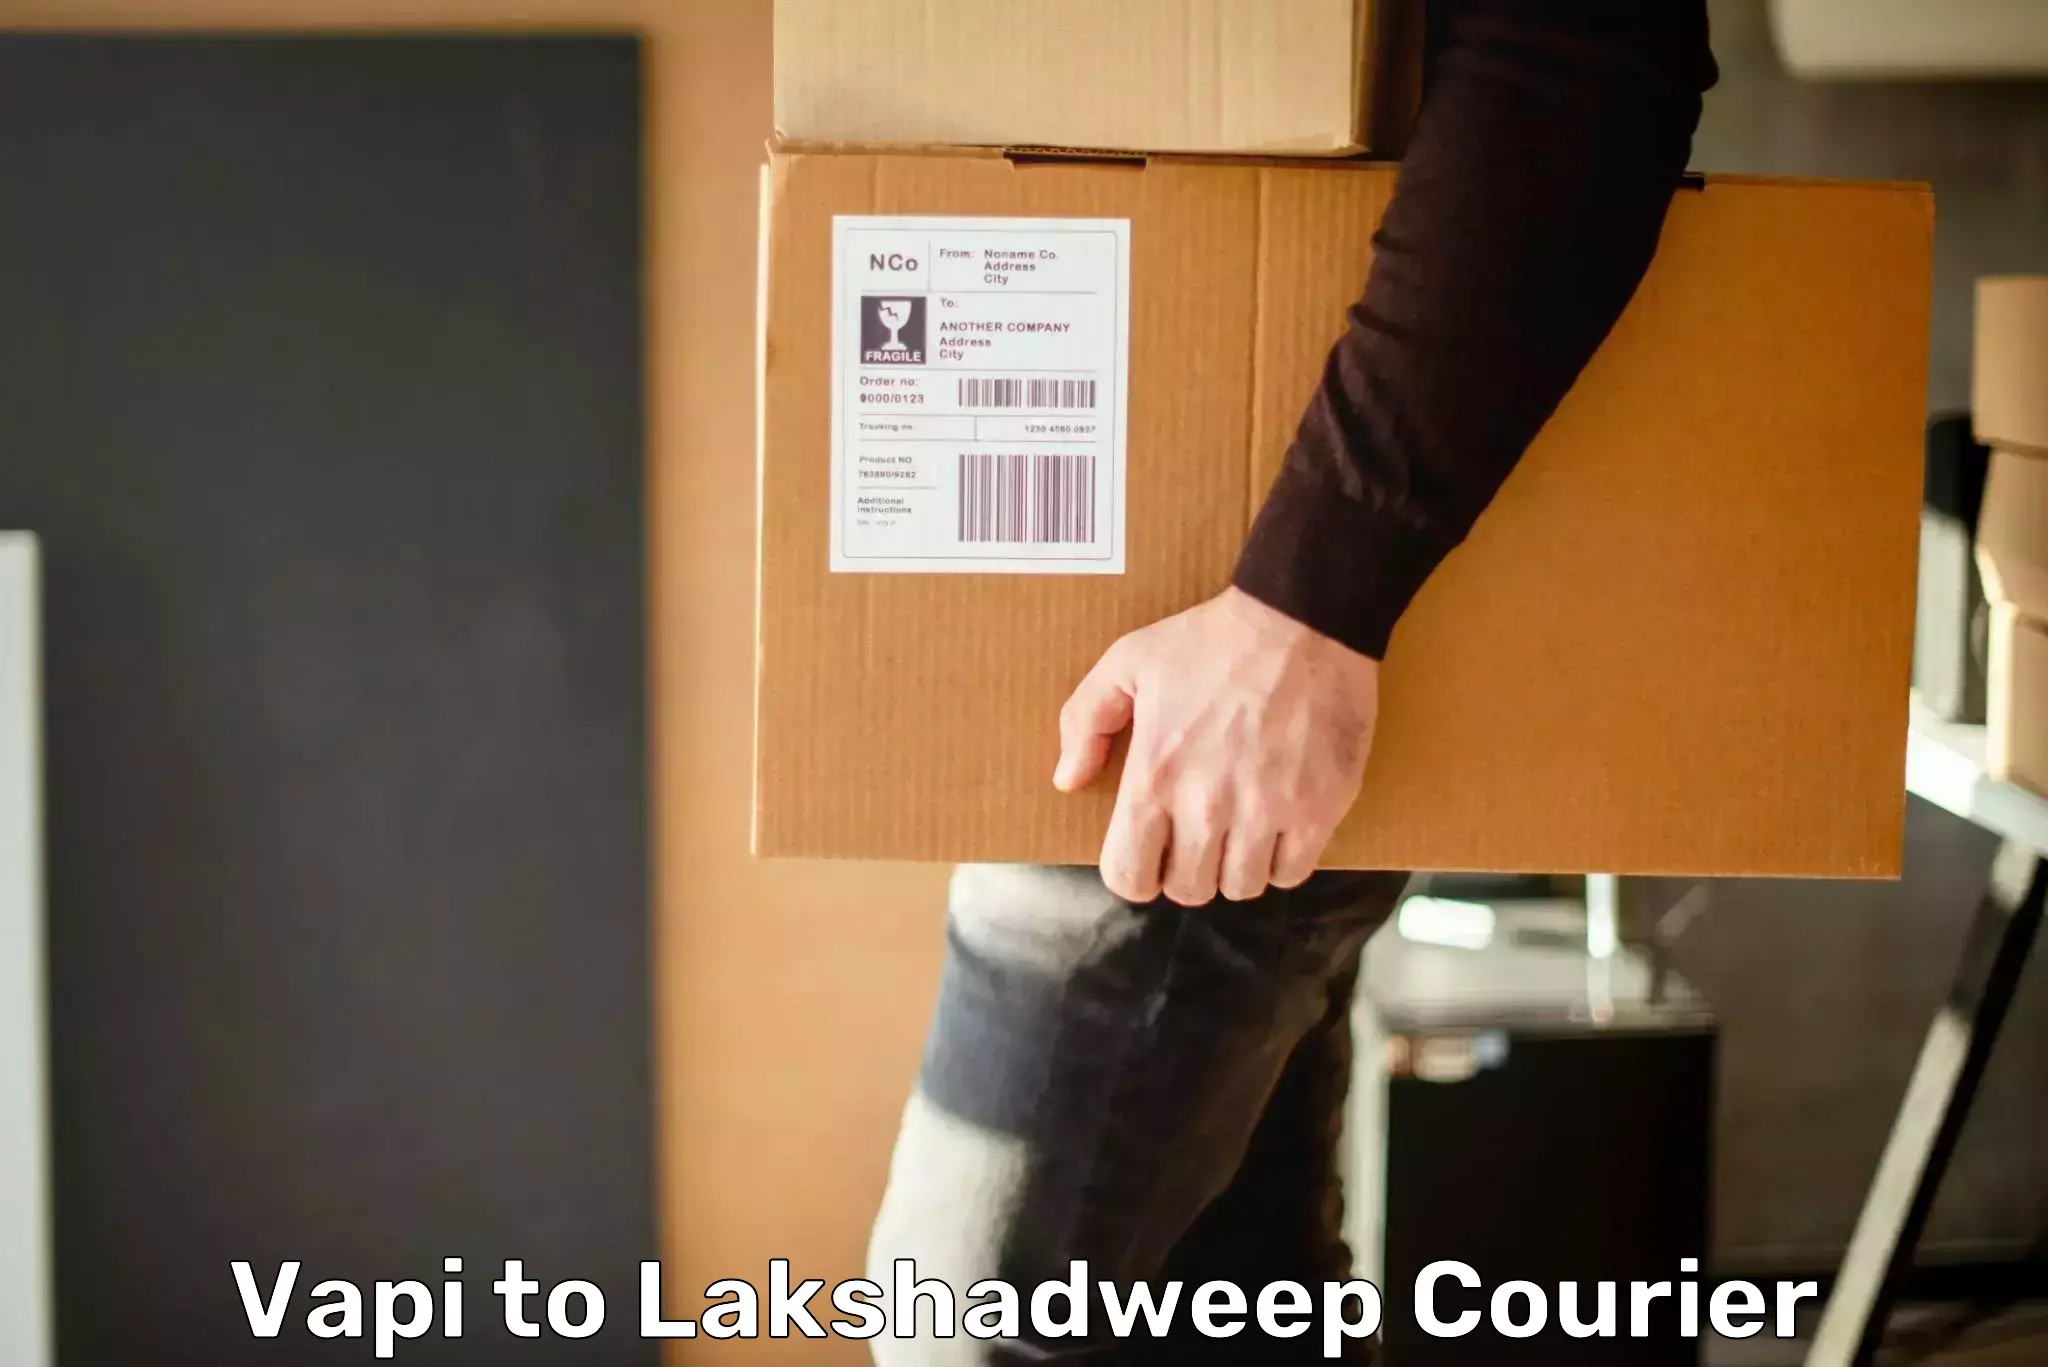 Package delivery network Vapi to Lakshadweep